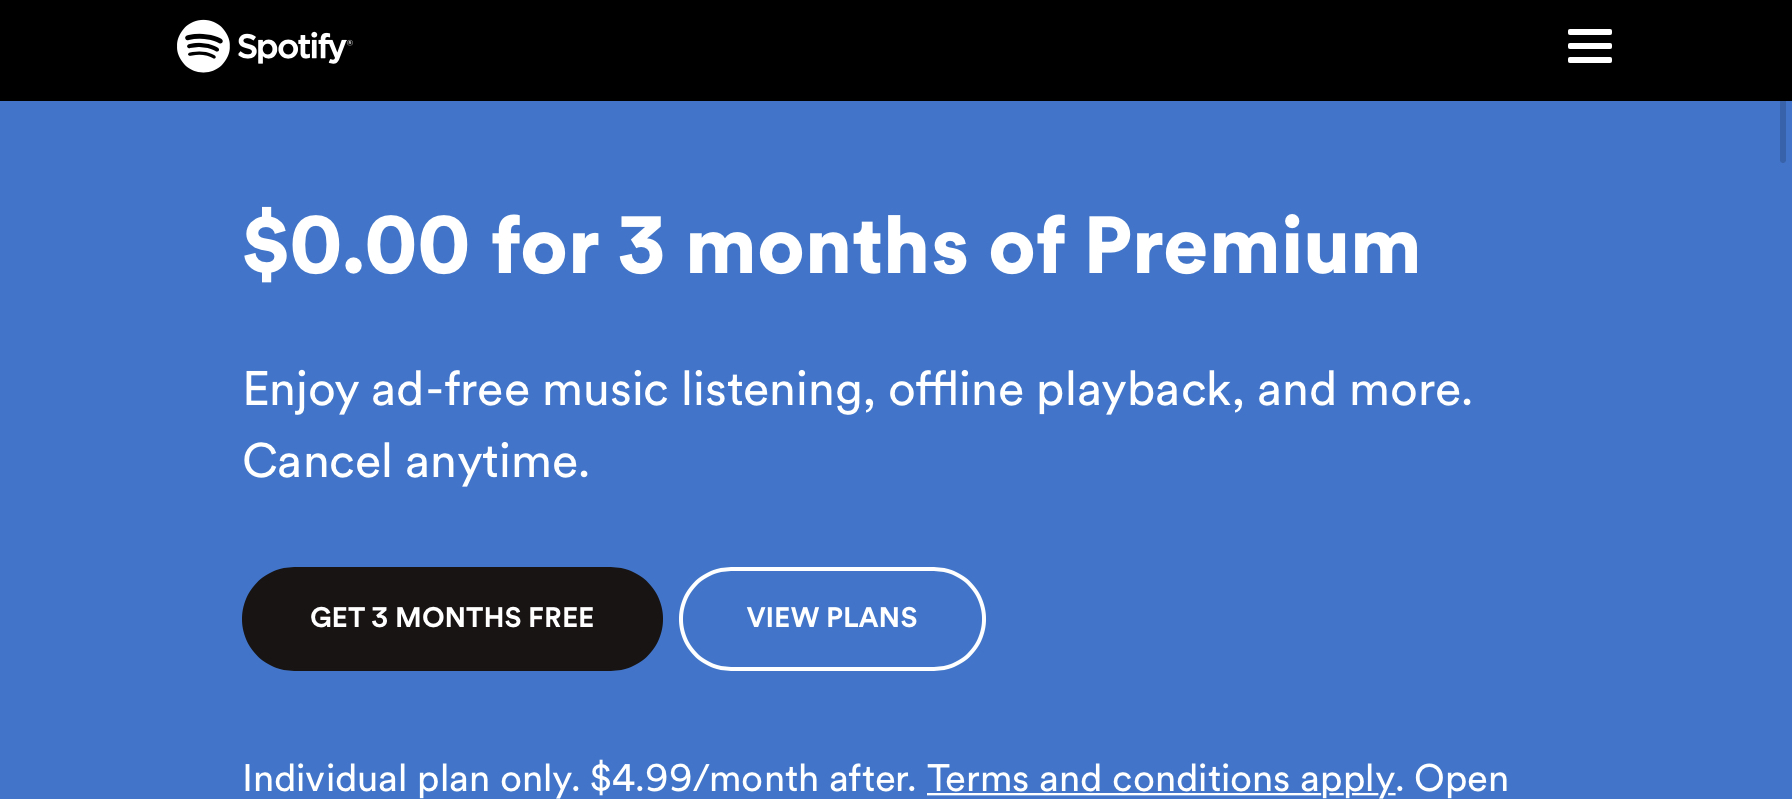 Spotify Premium 3 Months at the BEST PRICE!